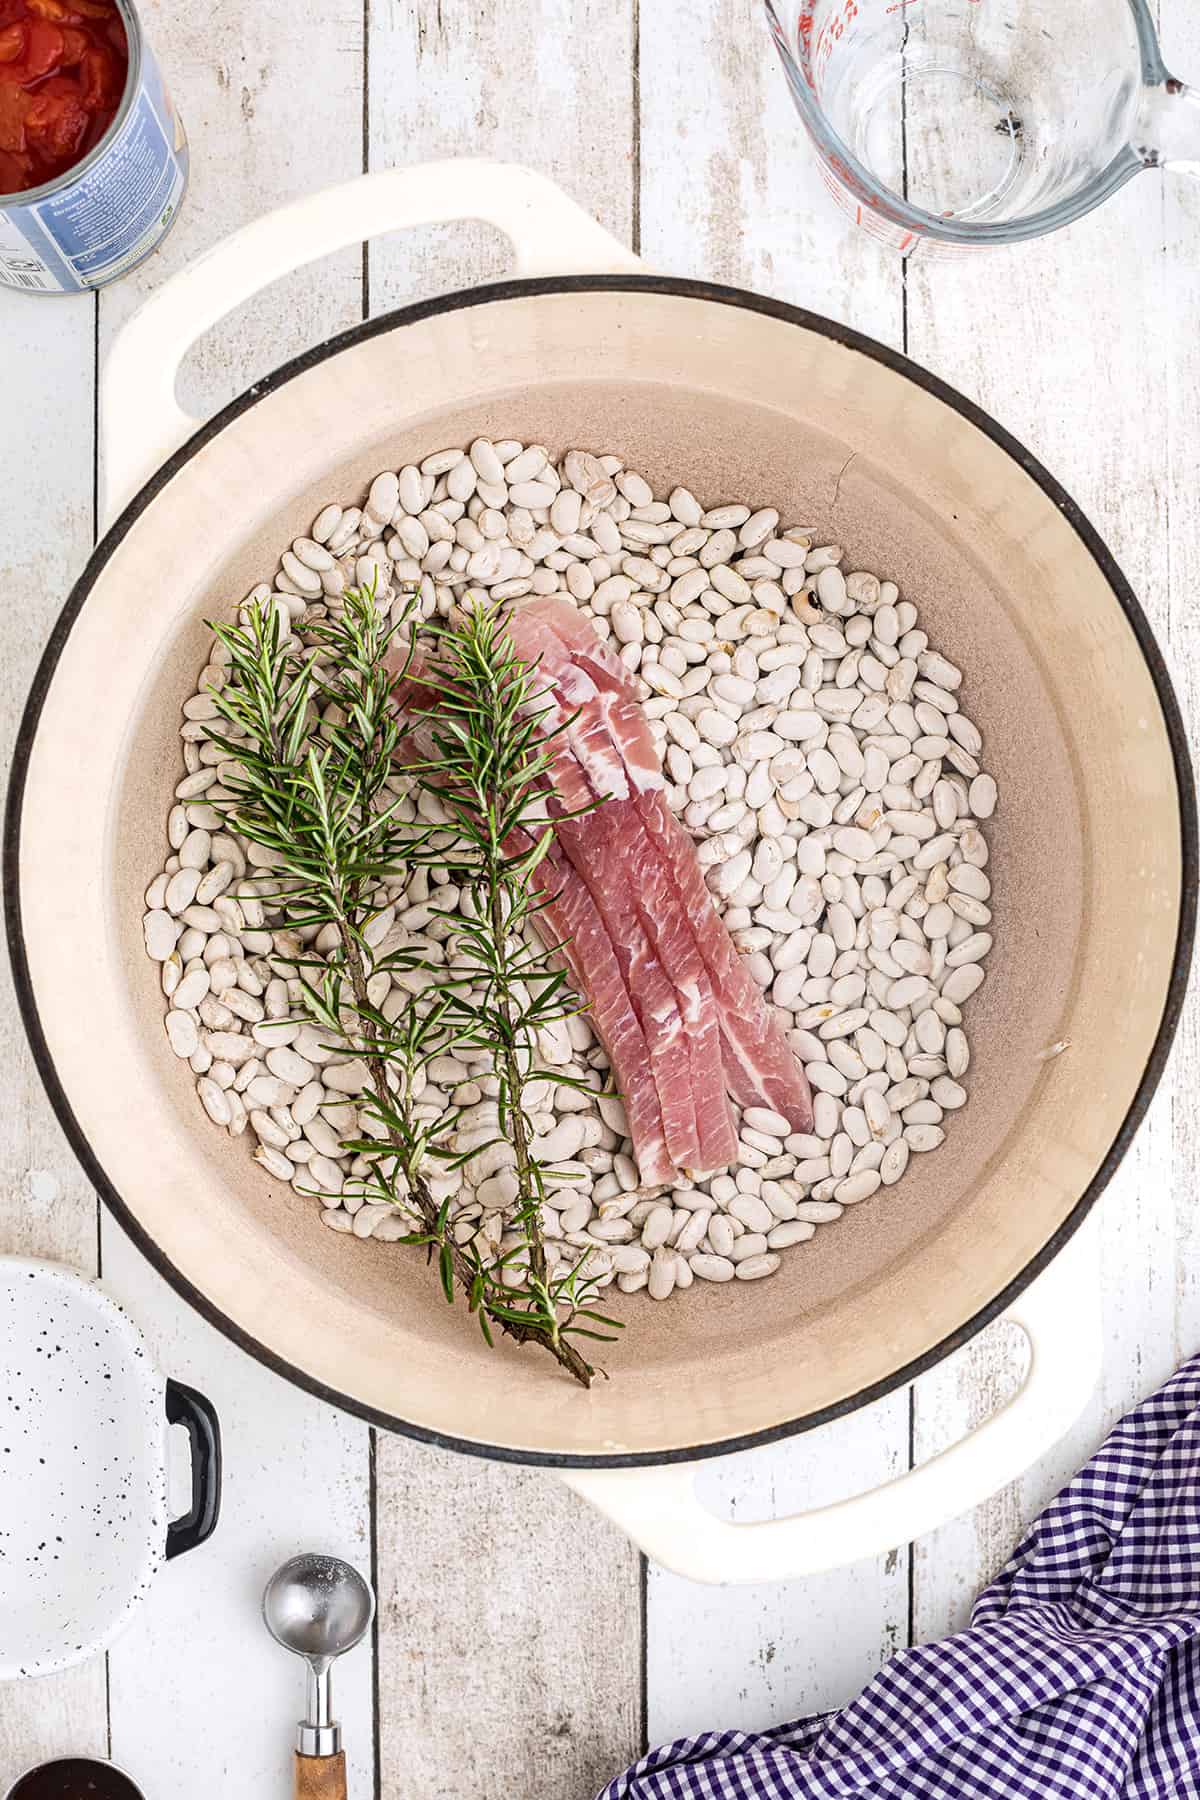 Beans, salt pork, and rosemary in a Dutch oven.